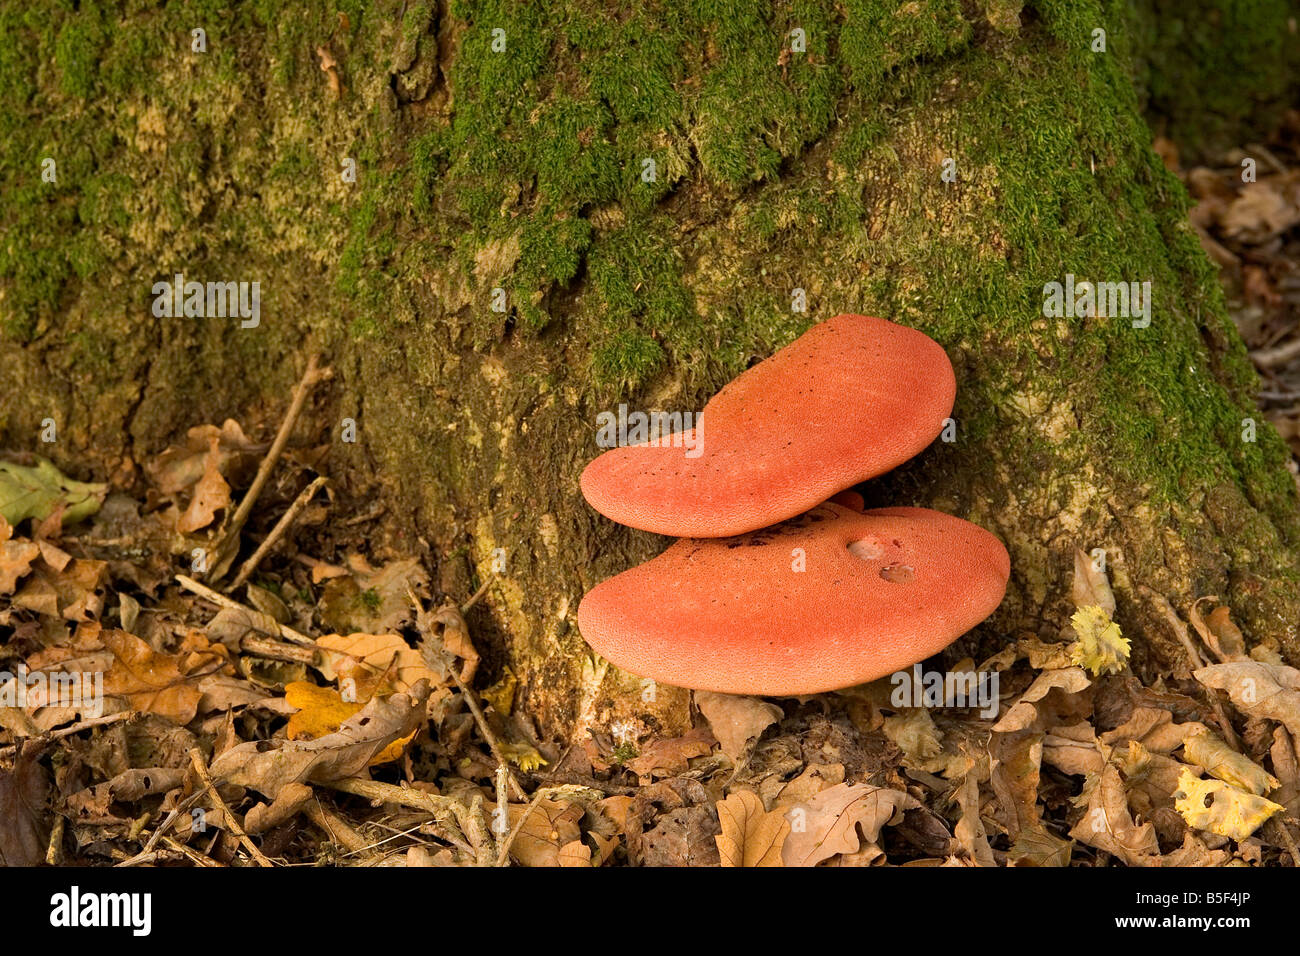 A beefsteak fungus growing at the base of an oak tree Stock Photo